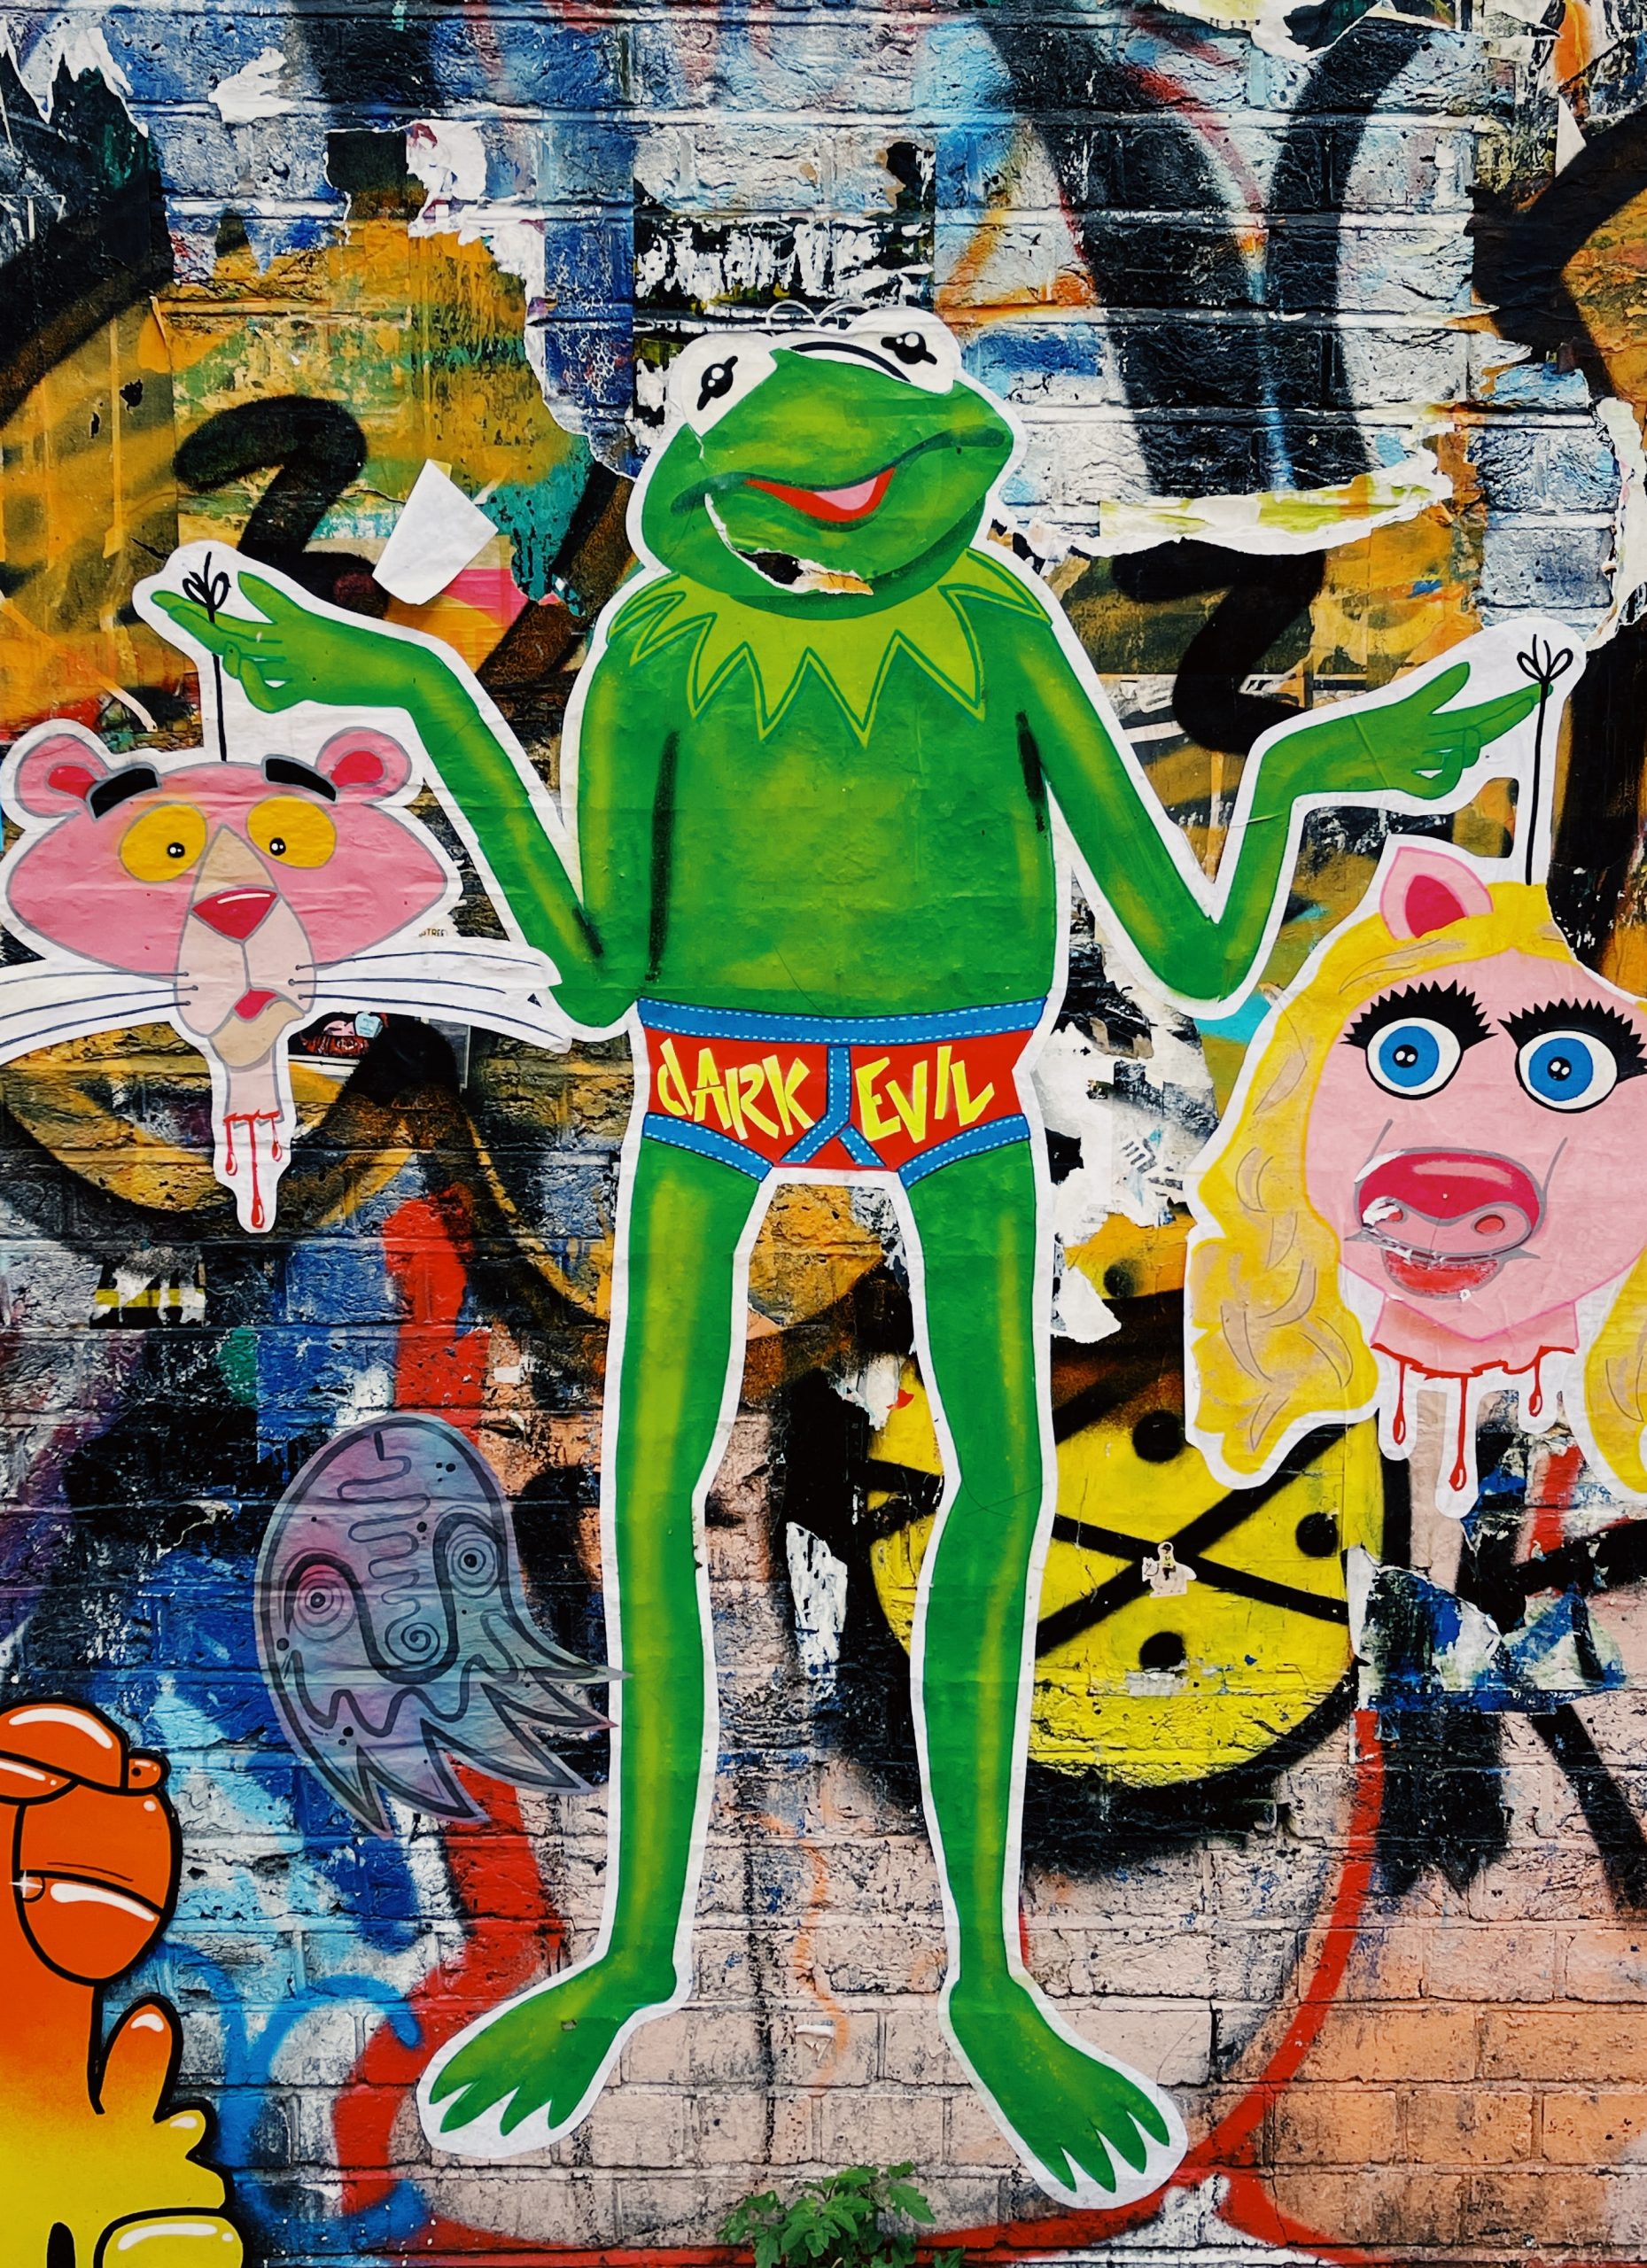 Street art mural of Kermit of the frog shrugging and wearing underwear that reads "Dark Evil", with a backdrop of other cartoon characters including Ms. Piggy  